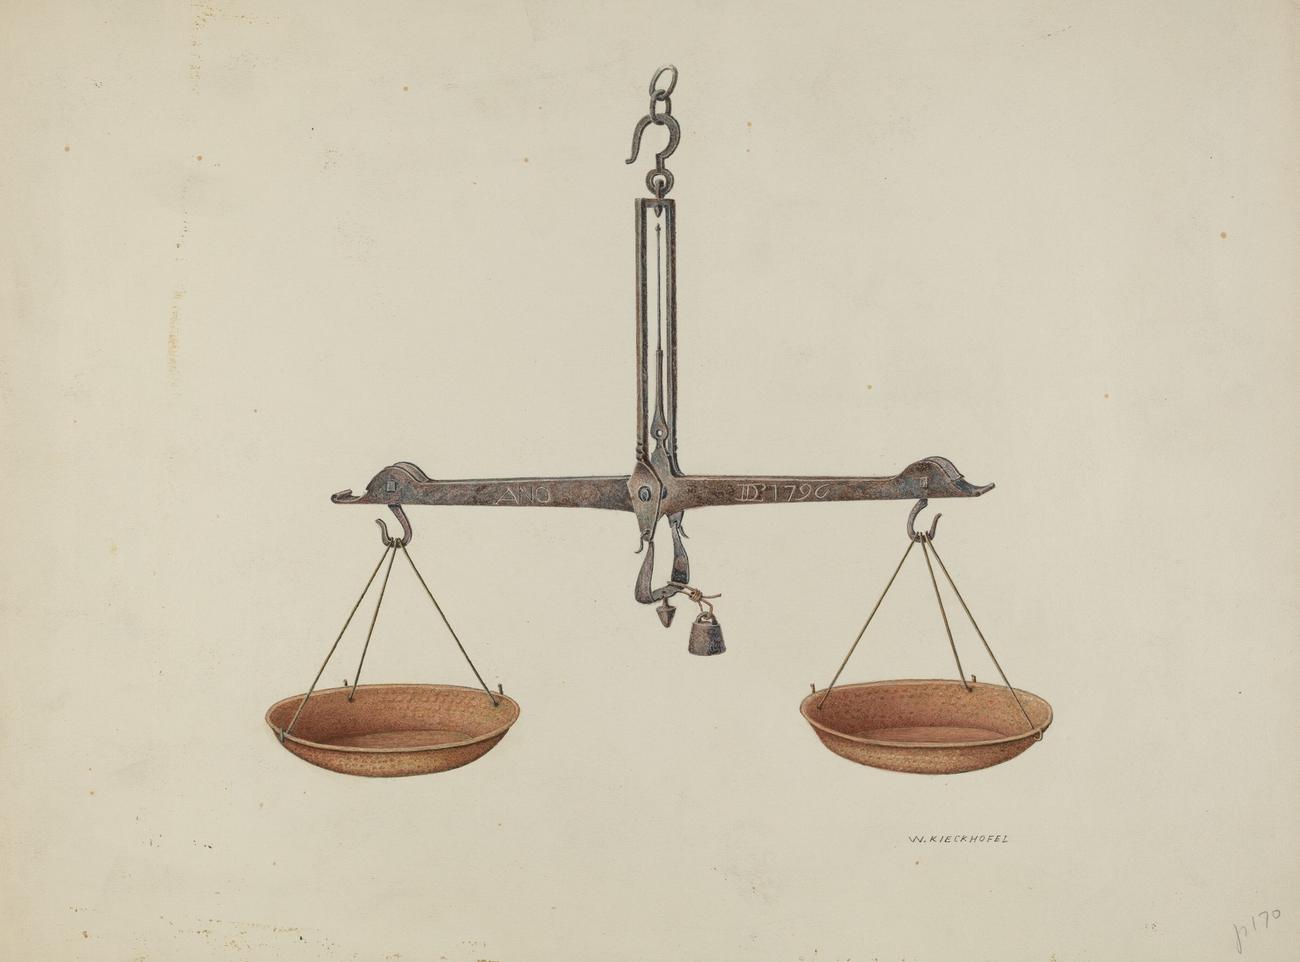 image of scales